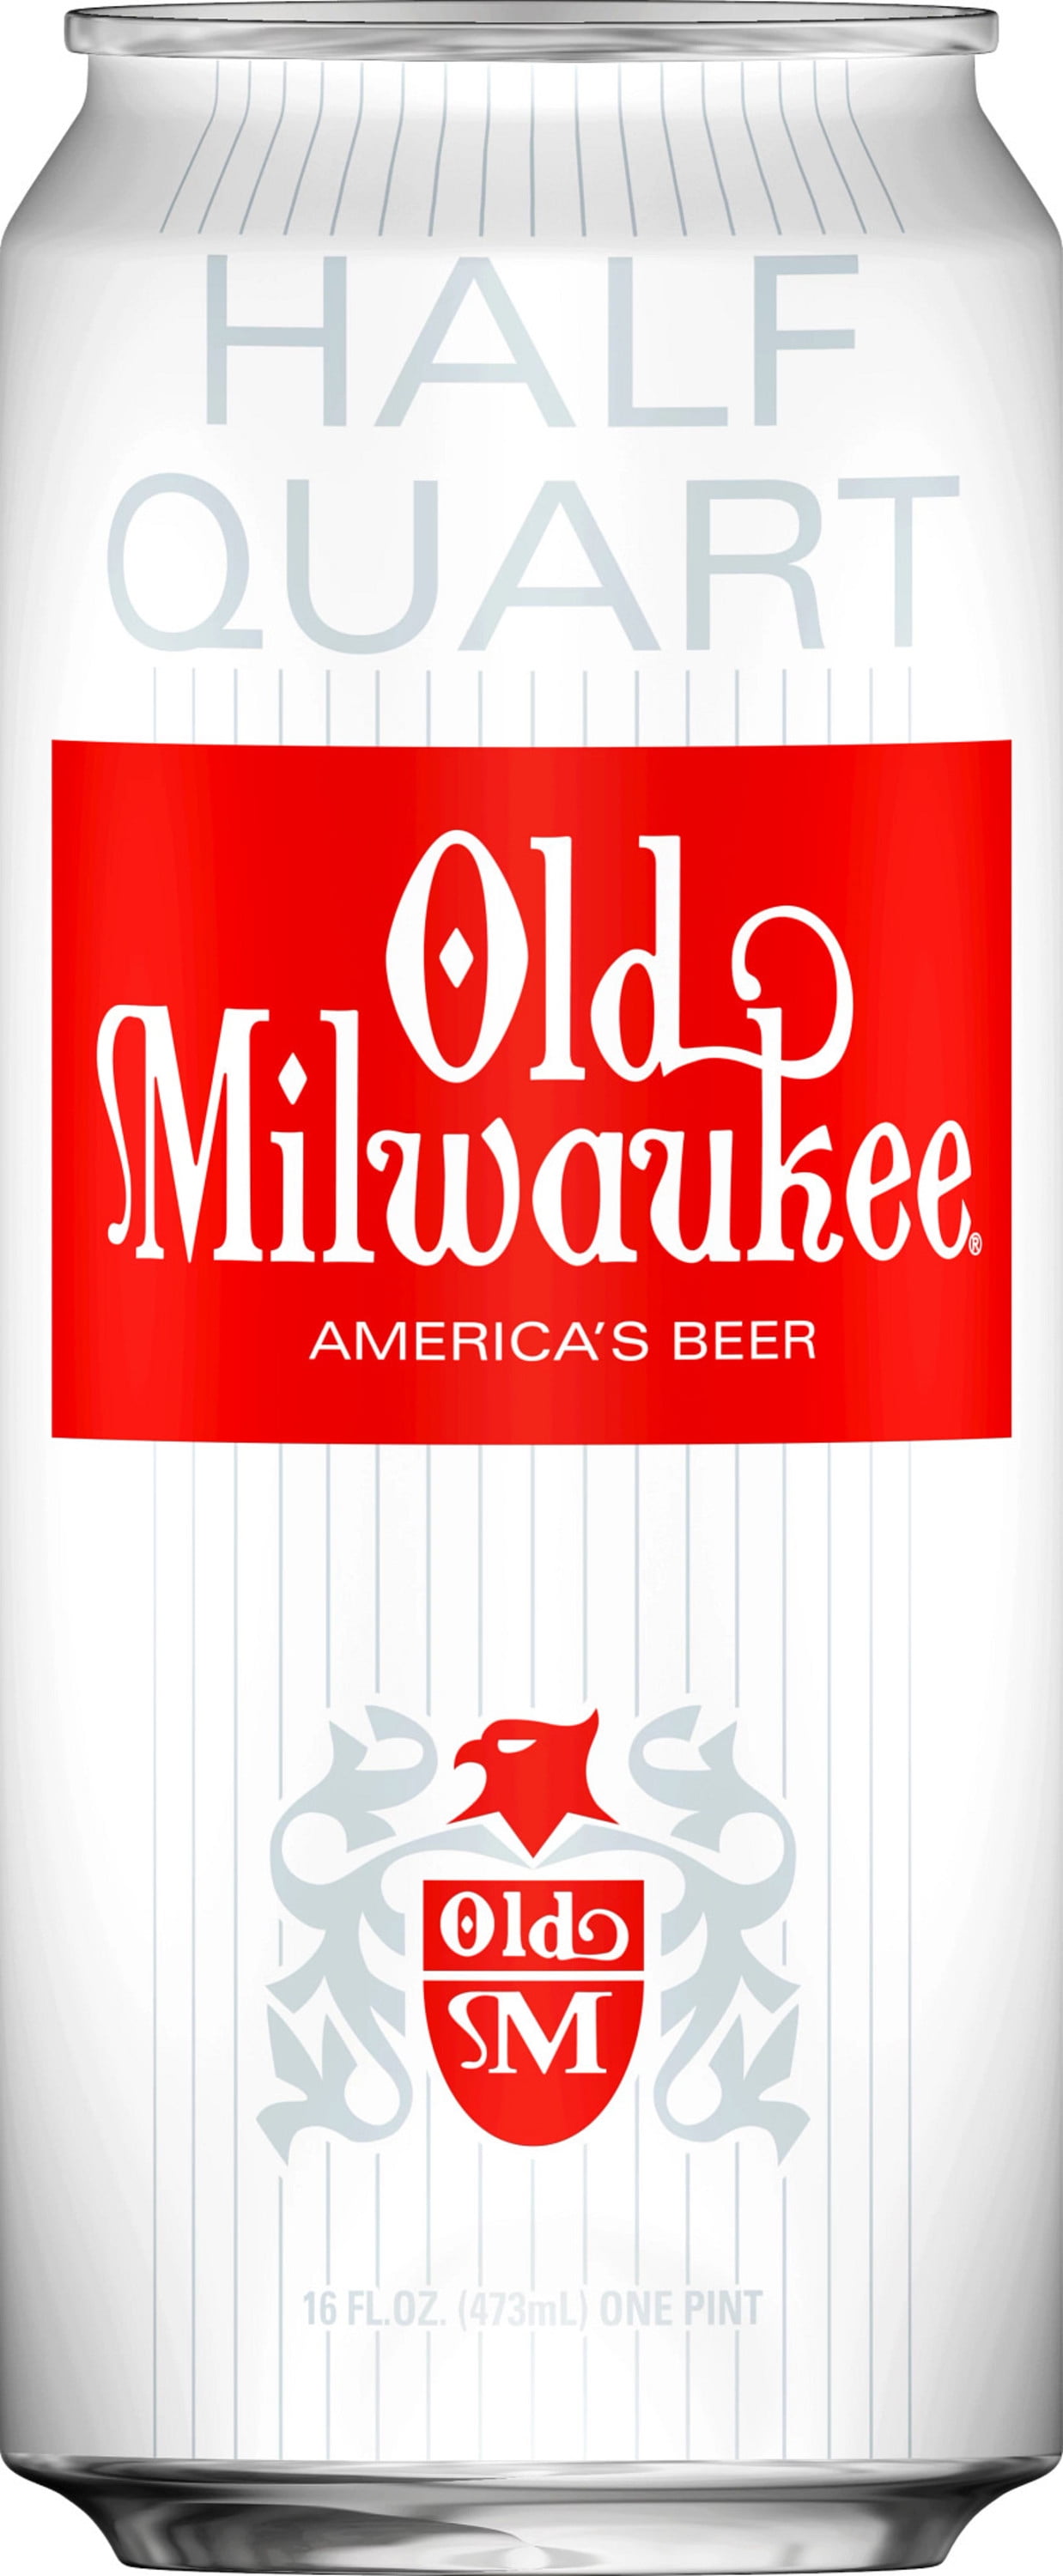 OLD MILWAUKEE Red lady 4 STICKER decal craft beer brewery brewing 